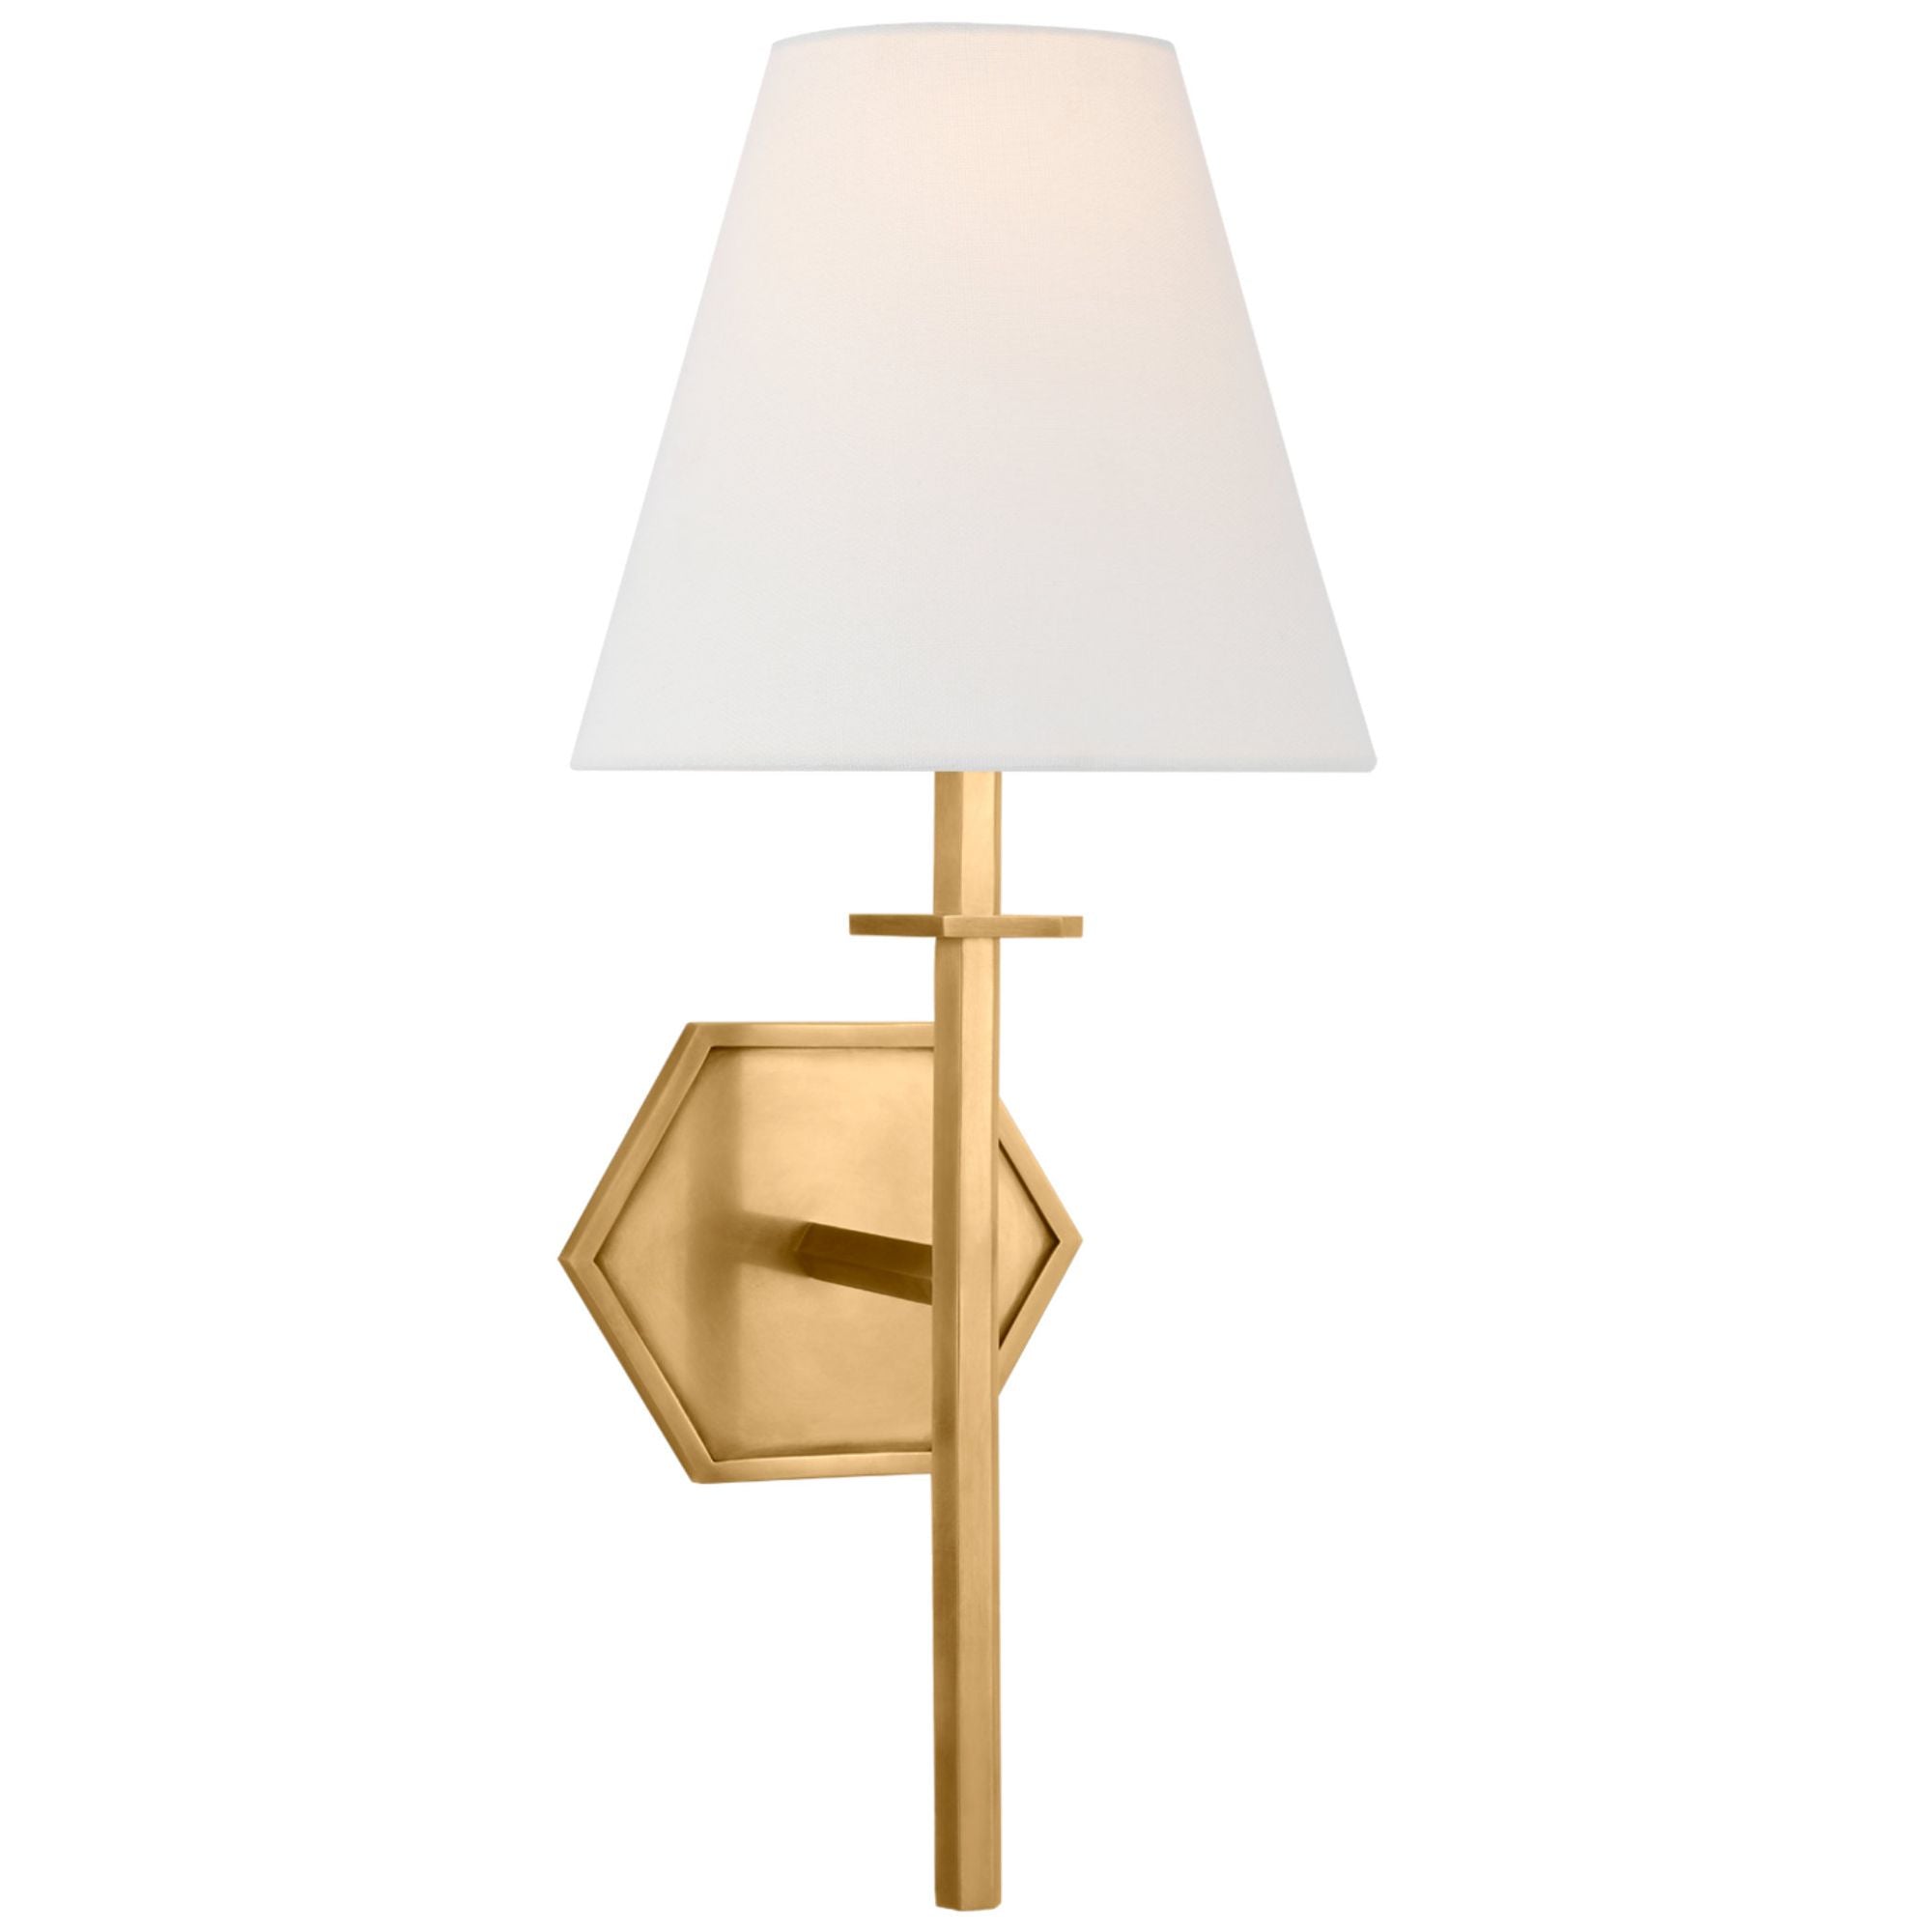 Paloma Contreras Olivier Medium Sconce in Hand-Rubbed Antique Brass with Linen Shade